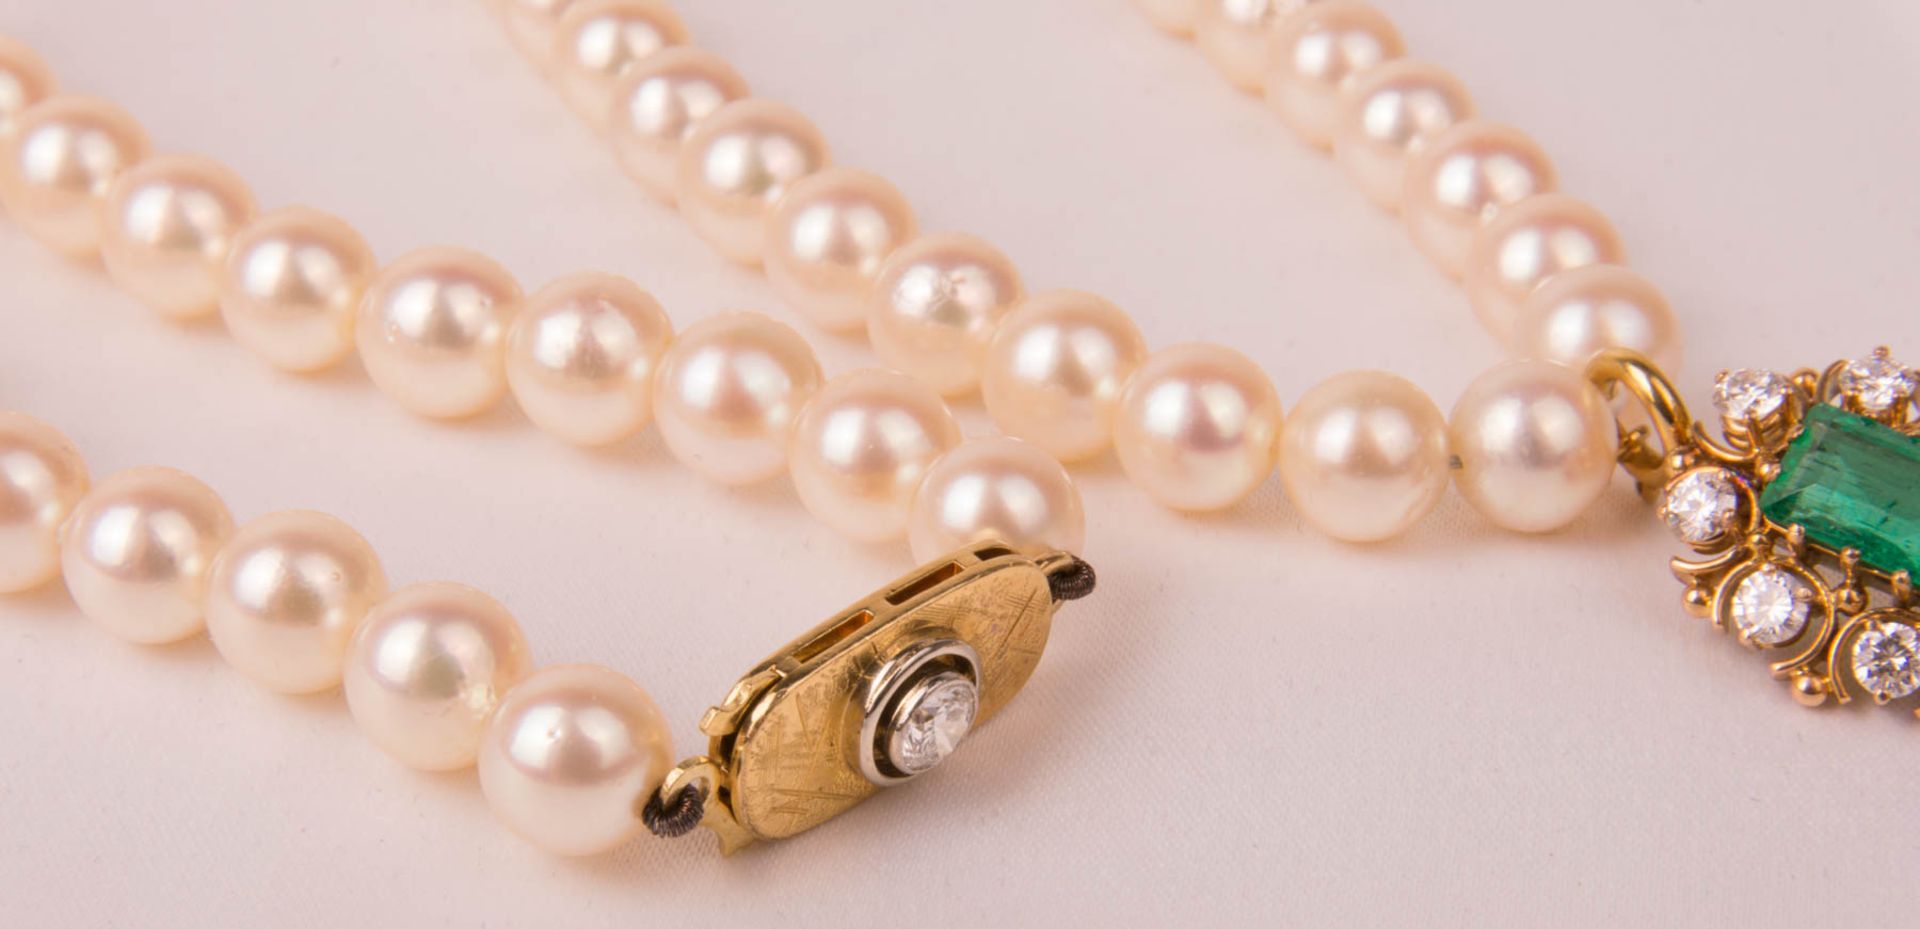 Pearl necklace with diamond set pendant, 750 yellow gold. - Image 3 of 6